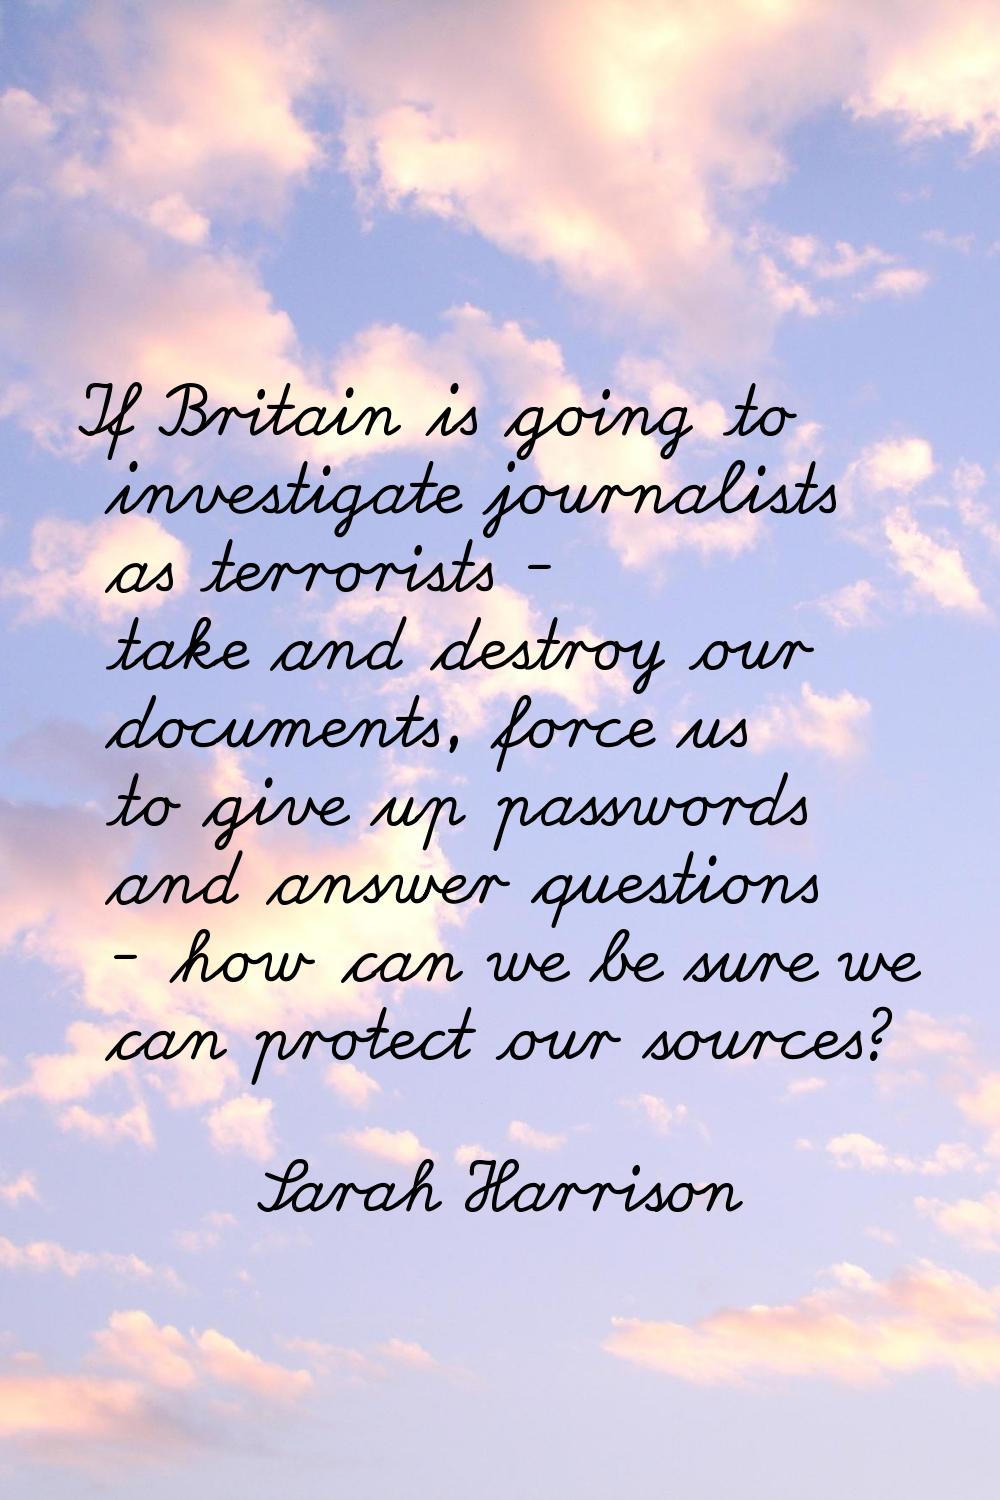 If Britain is going to investigate journalists as terrorists - take and destroy our documents, forc